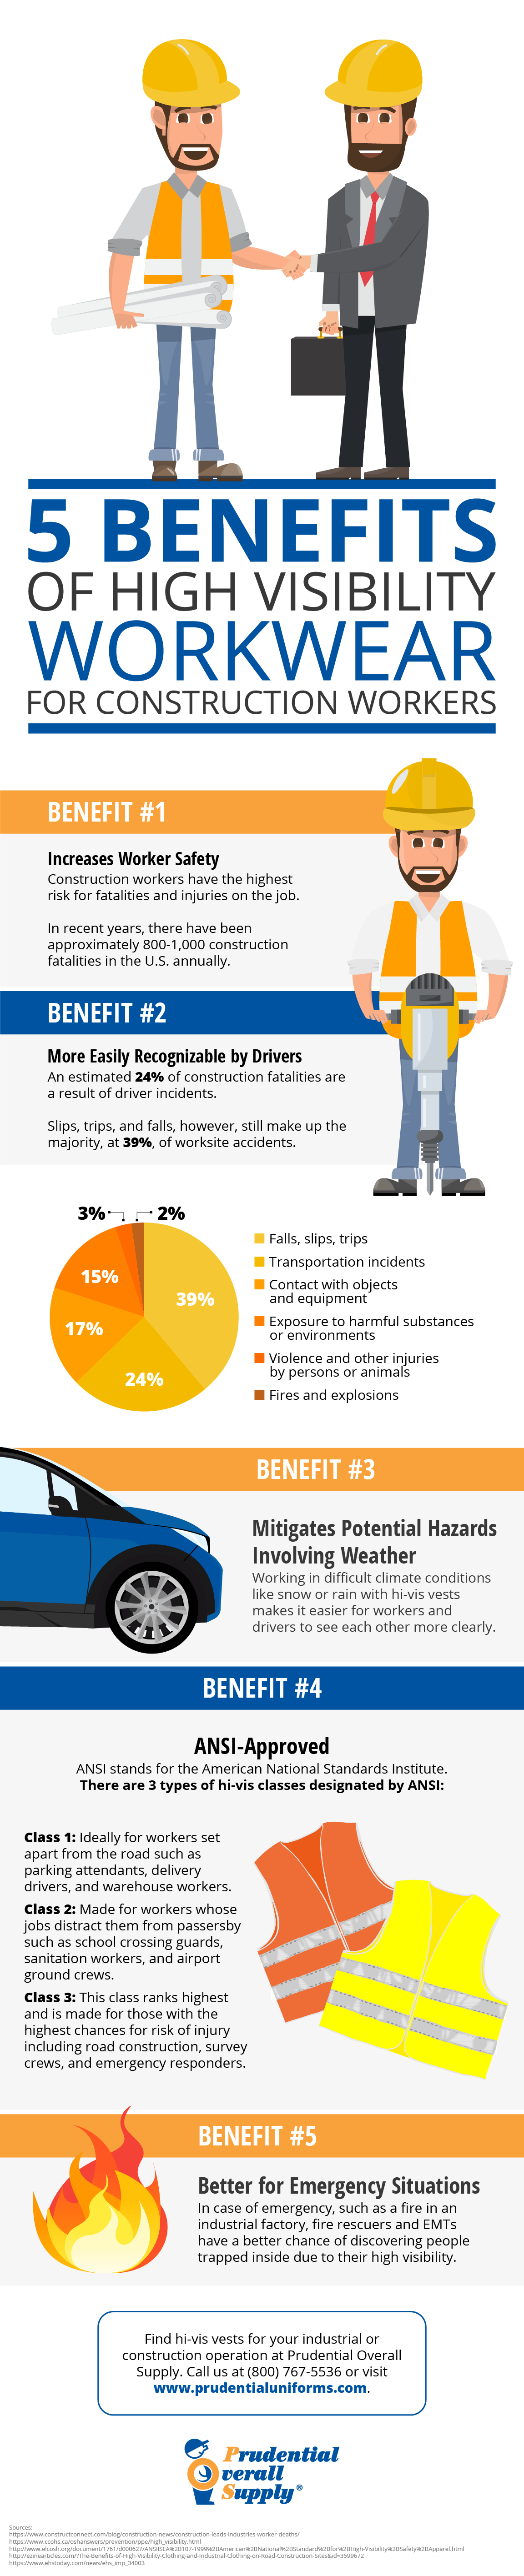 Benefits of High-Visibility Workwear for Construction Workers Infographic